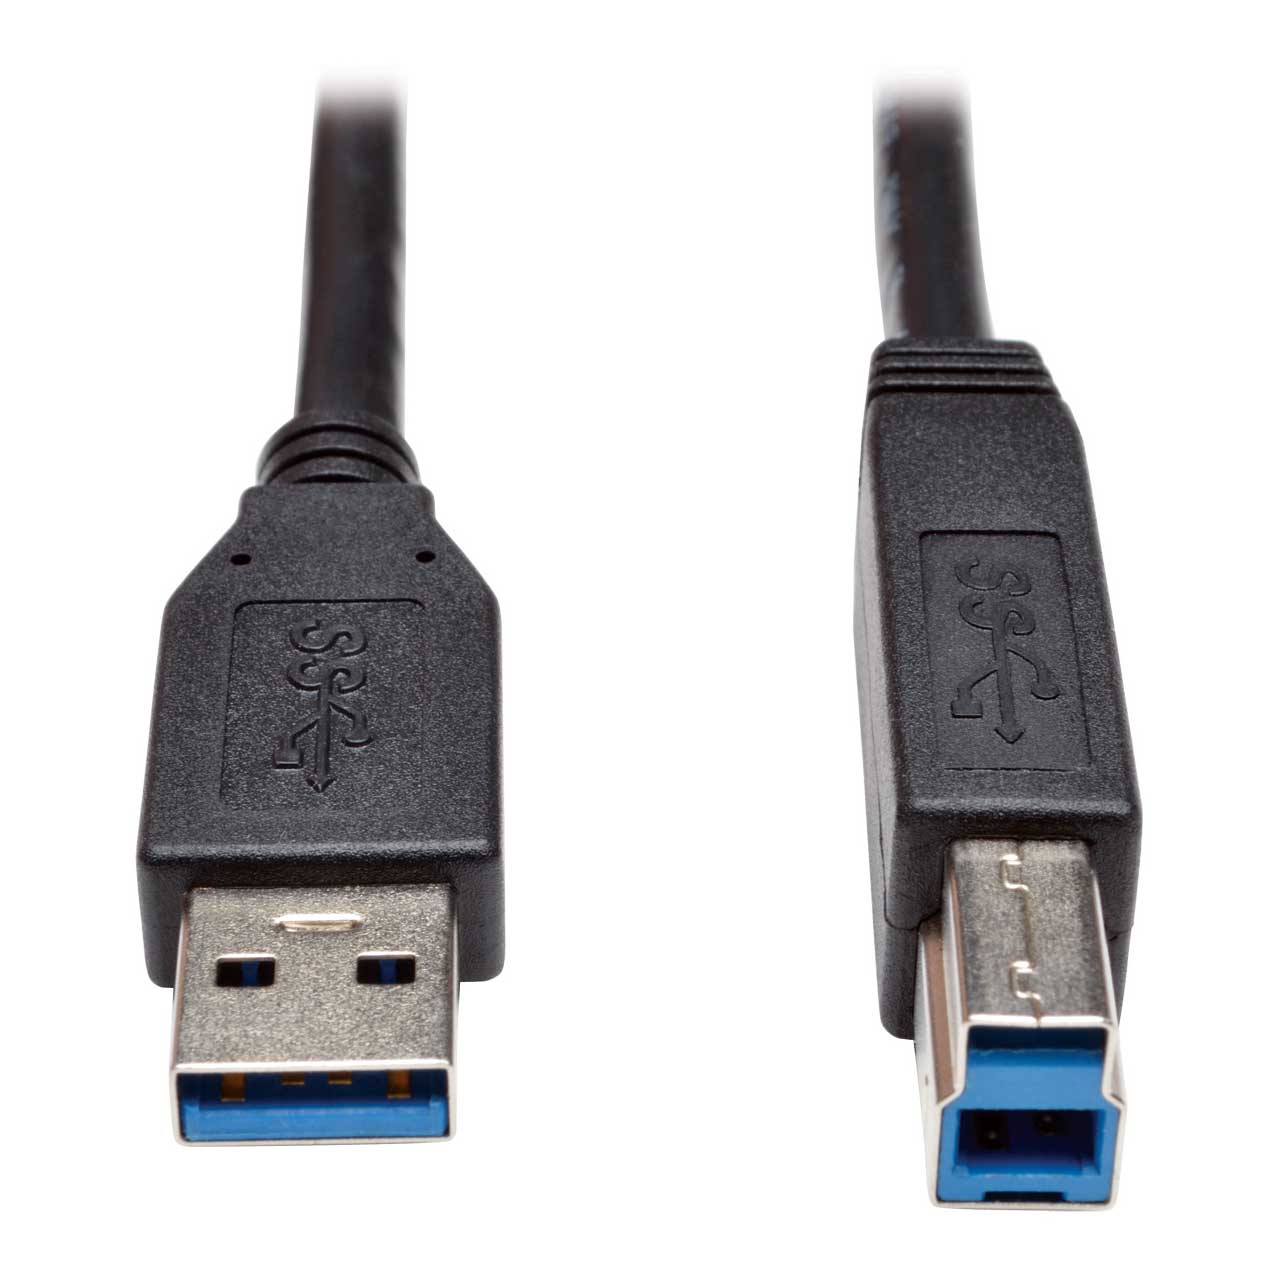  Belkin USB A to USB B Cable - 6 foot USB 3.0 Cable - SuperSpeed USB  3.0 Extension Cable - USB-A to USB-B Printer Cable - Male-to-Male USB Cable  - USB